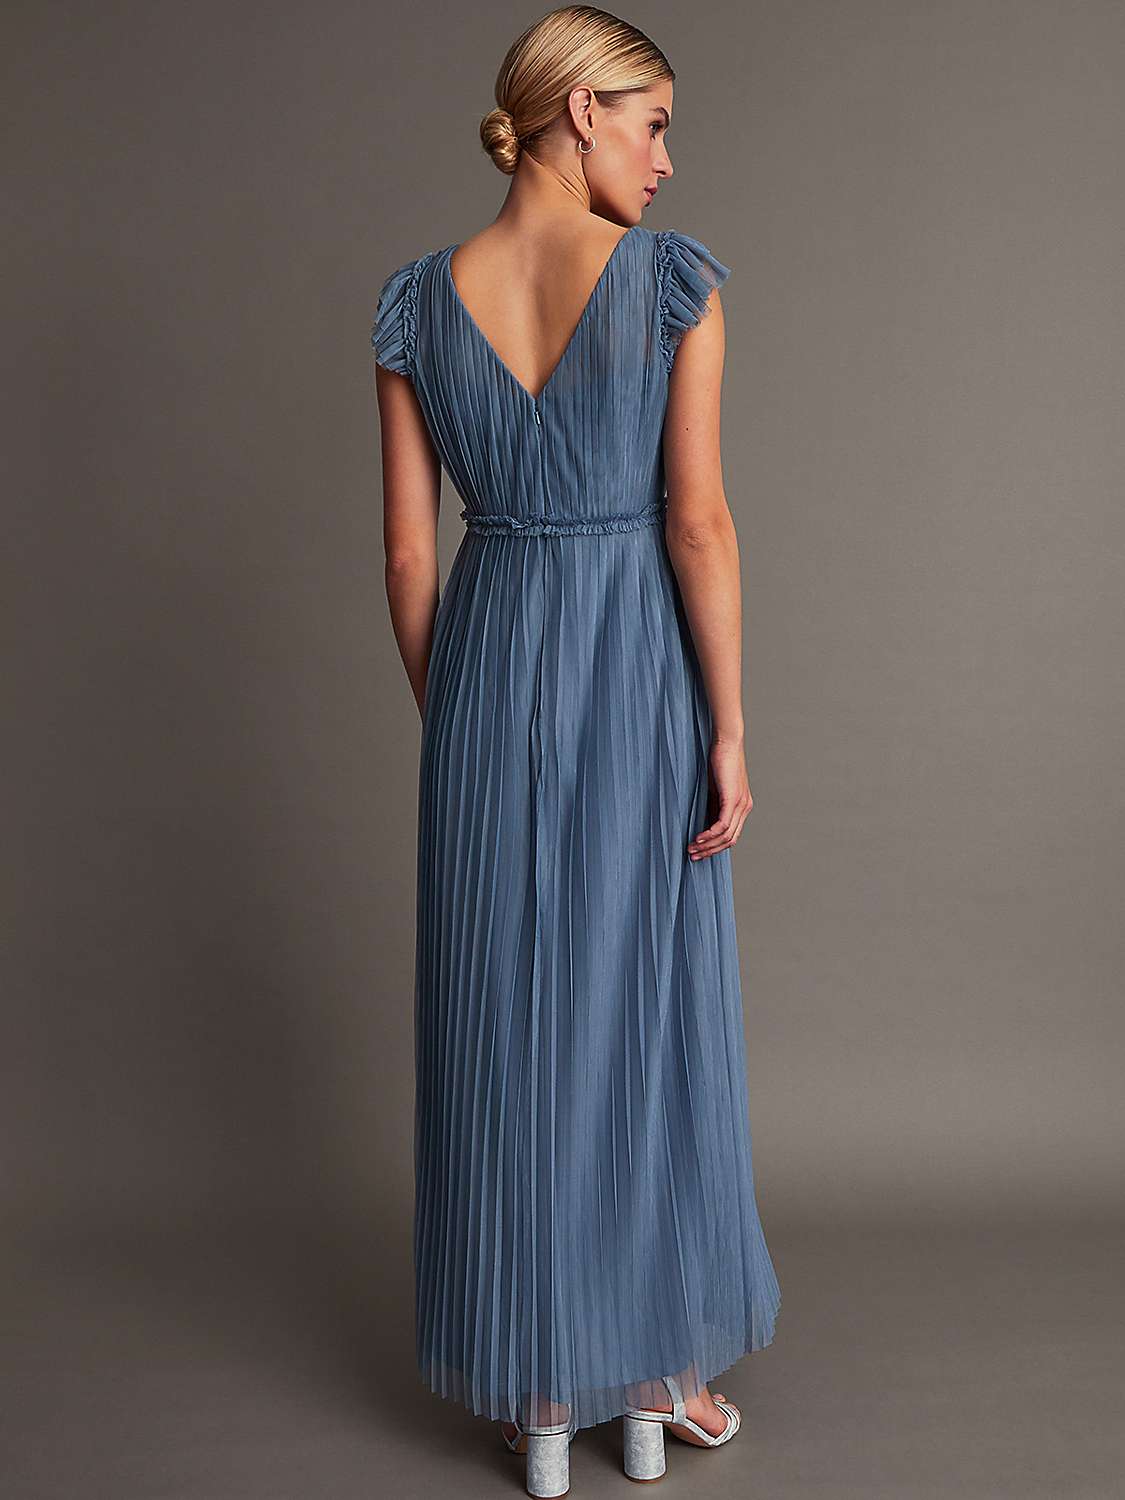 Buy Monsoon Wendy Pleated Maxi Dress, Blue Online at johnlewis.com